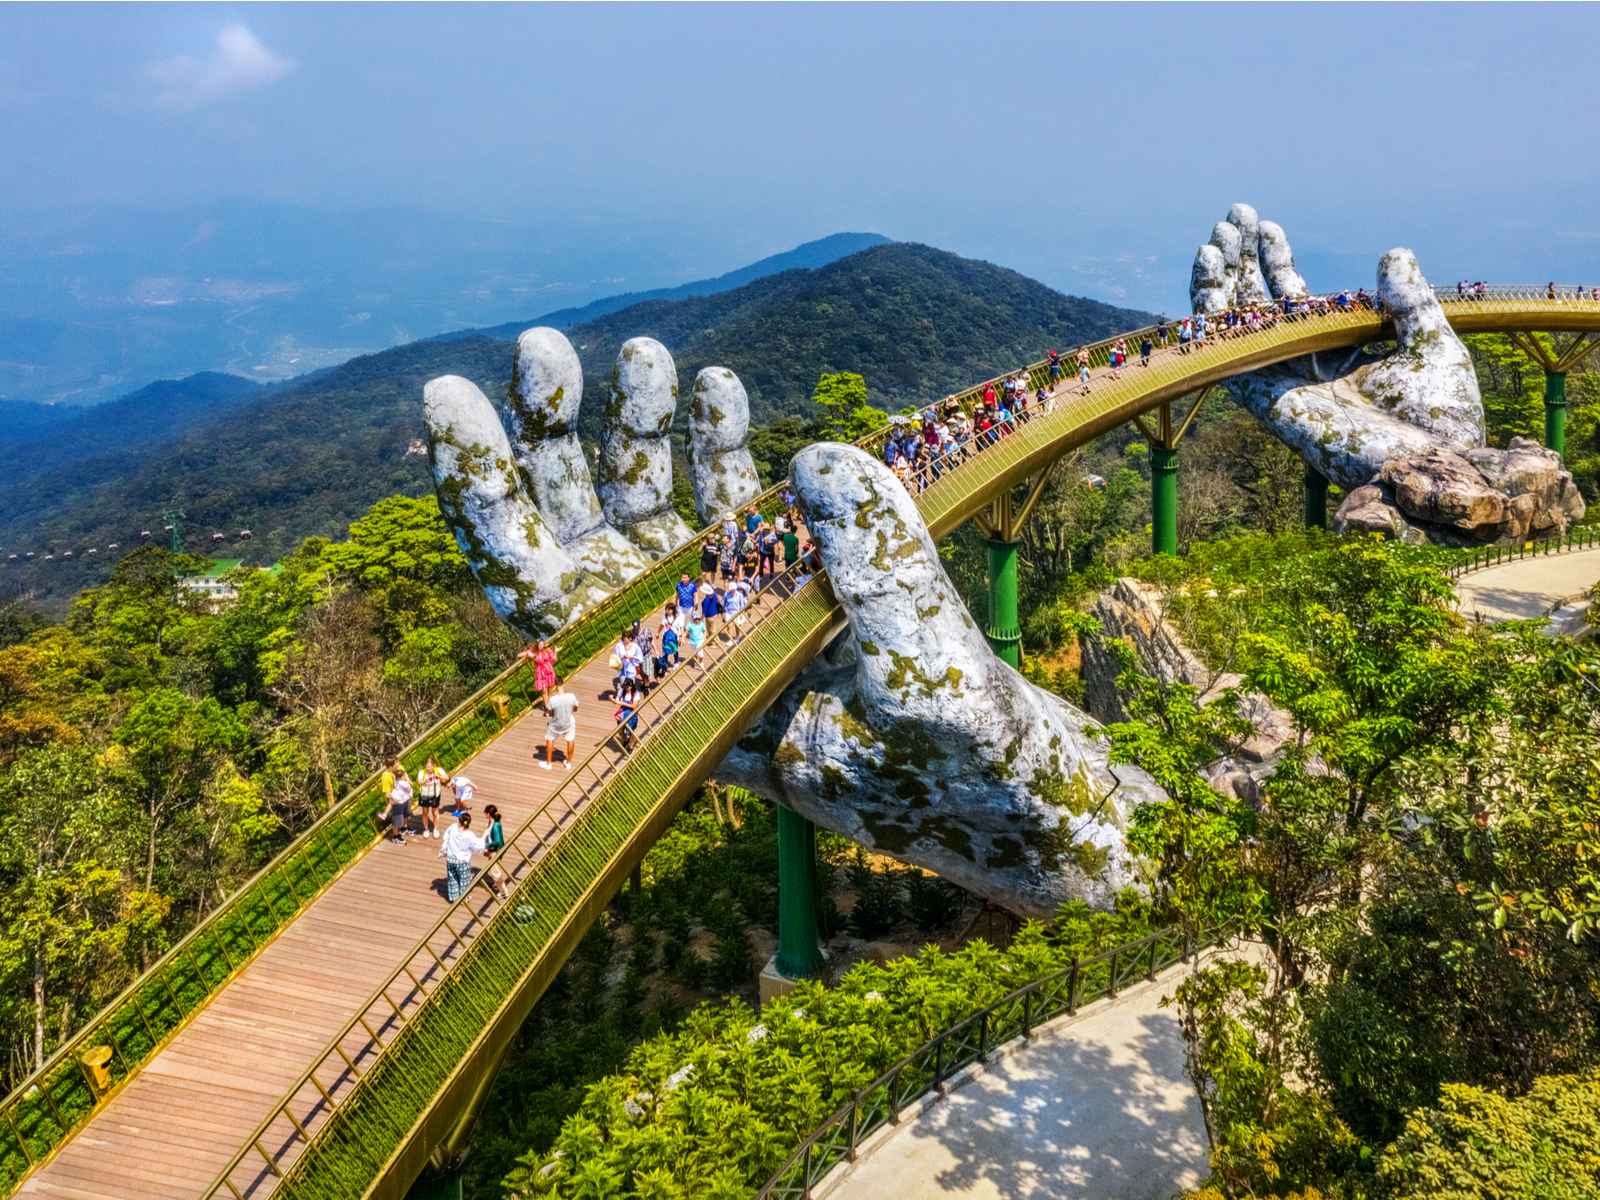 View of the Golden Bridge lifted by two giant stone hands during the best time to visit Vietnam